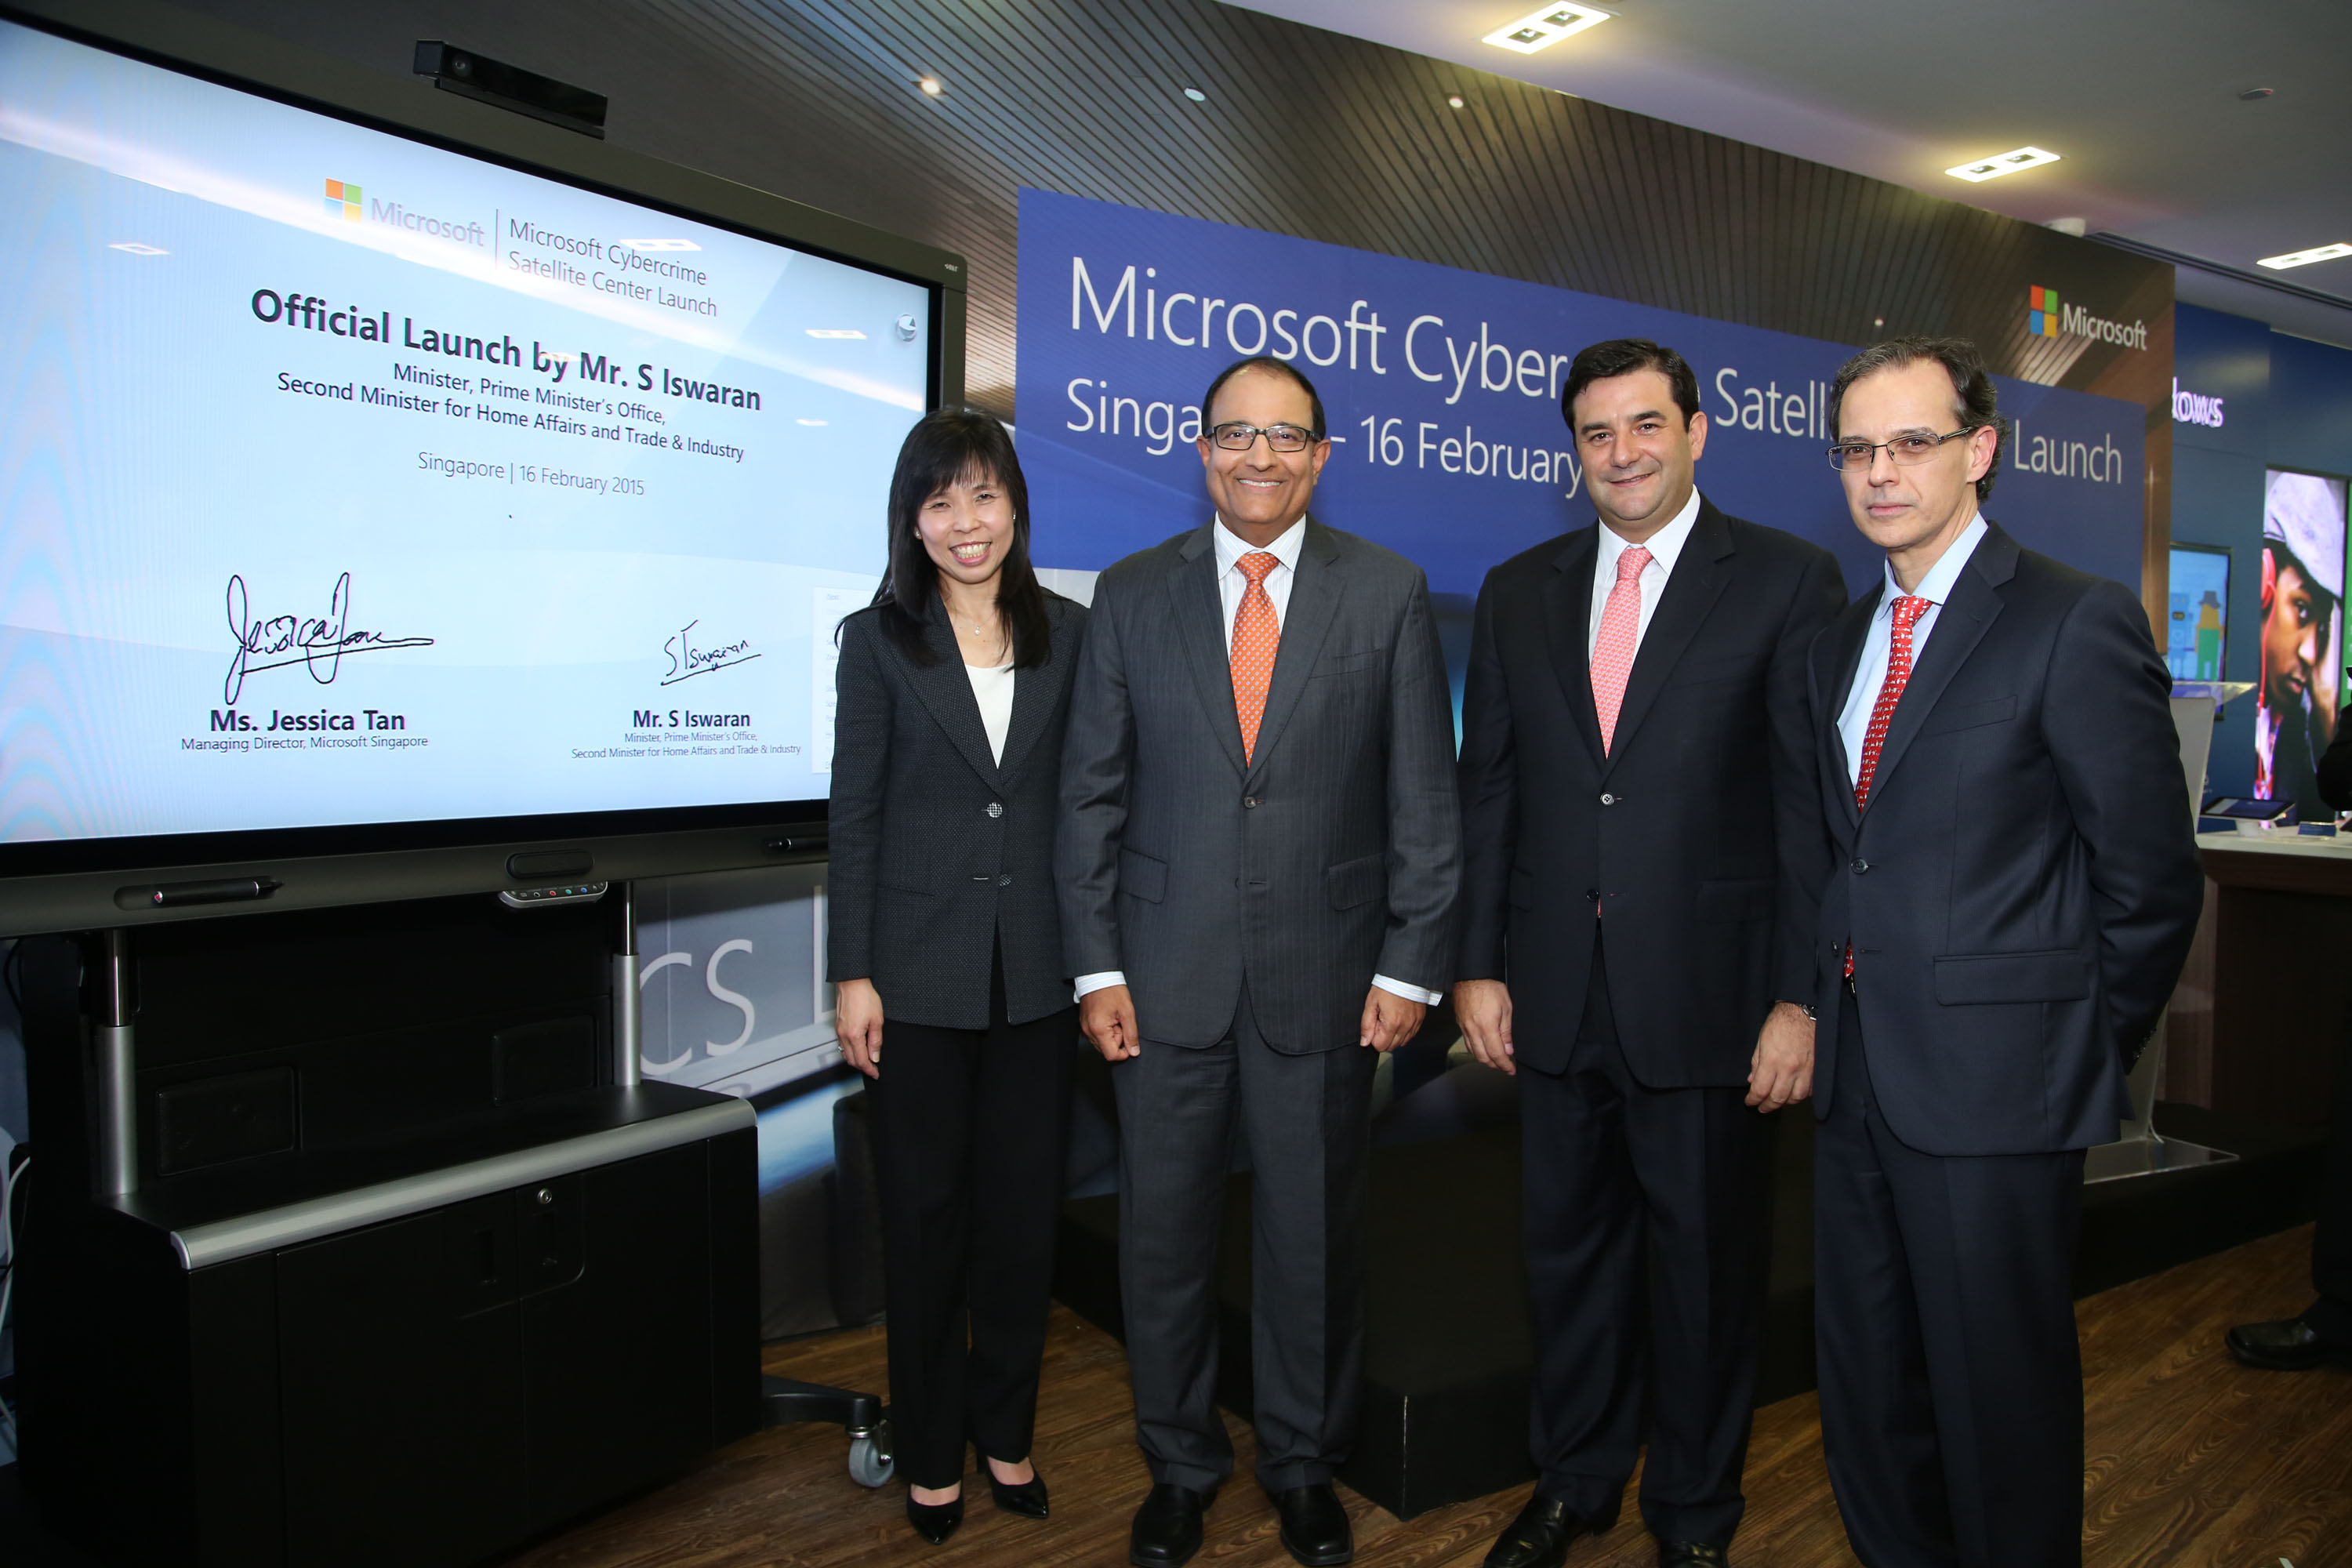 (From left to right) Ms Jessica Tan, Managing Director, Microsoft Singapore, Mr S Iswaran, Minister for Prime Minister’s Office and Second Minister for Home Affairs, Mr Cesar Cernuda, President, Microsoft Asia and Mr Richard Boscovich, Assistant General Counsel, Digital Crimes Unit (DCU), Microsoft Corp at the launch of the Microsoft Cybercrime Satellite Centre in Singapore